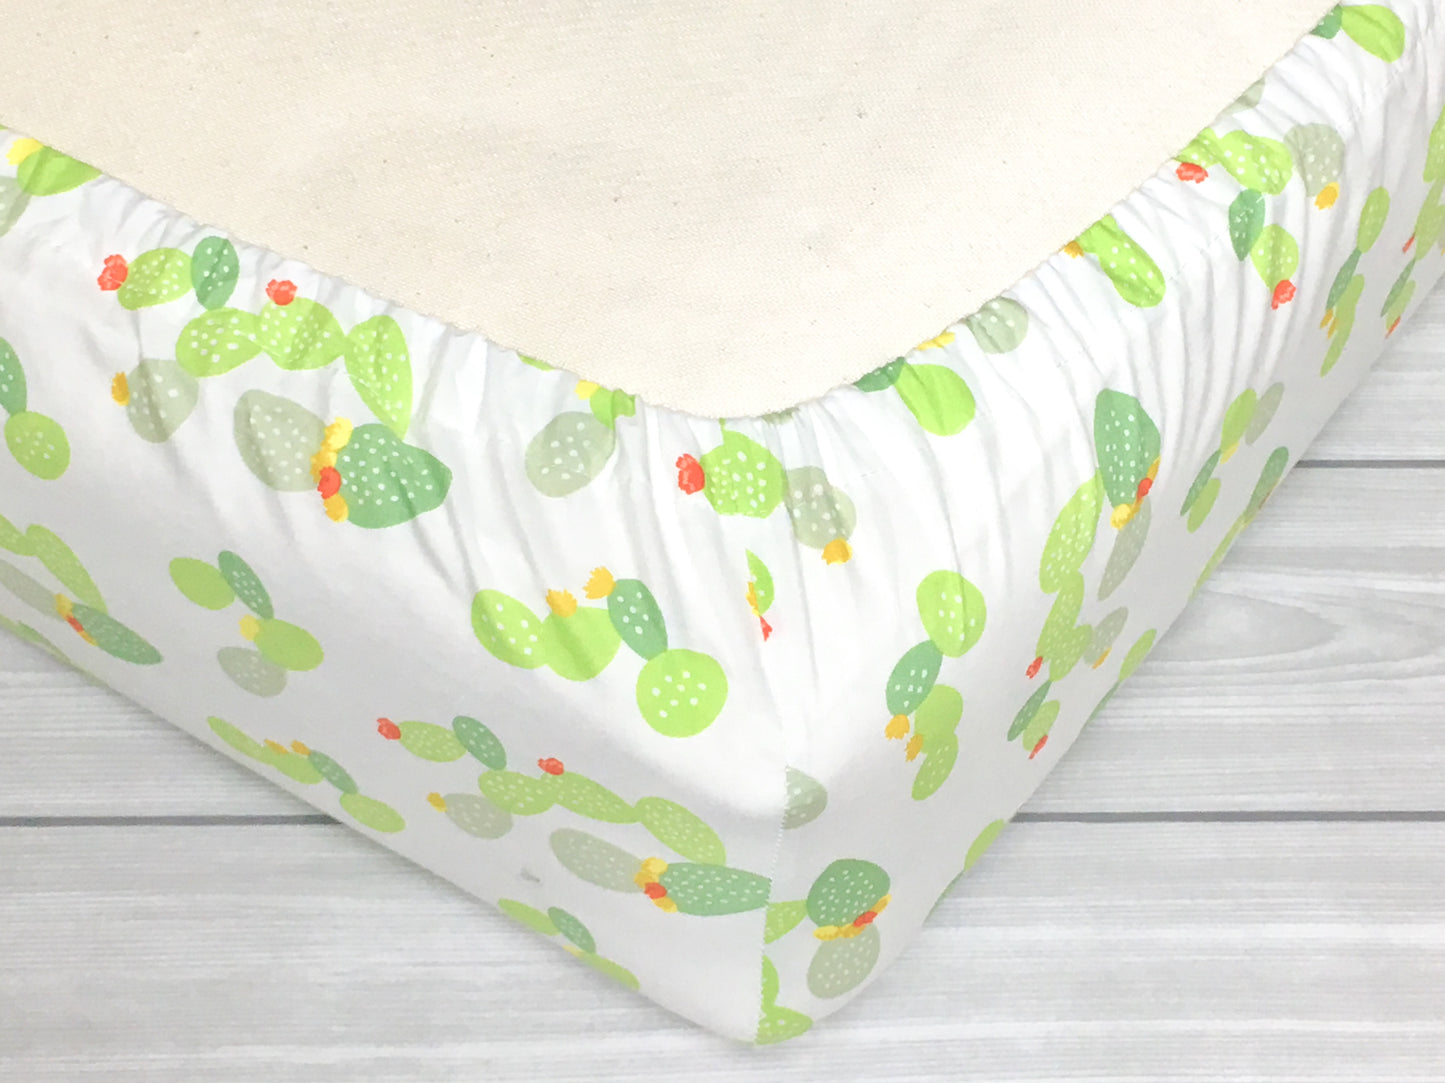 Prickly Cactus Crib Sheet or Changing Pad Cover